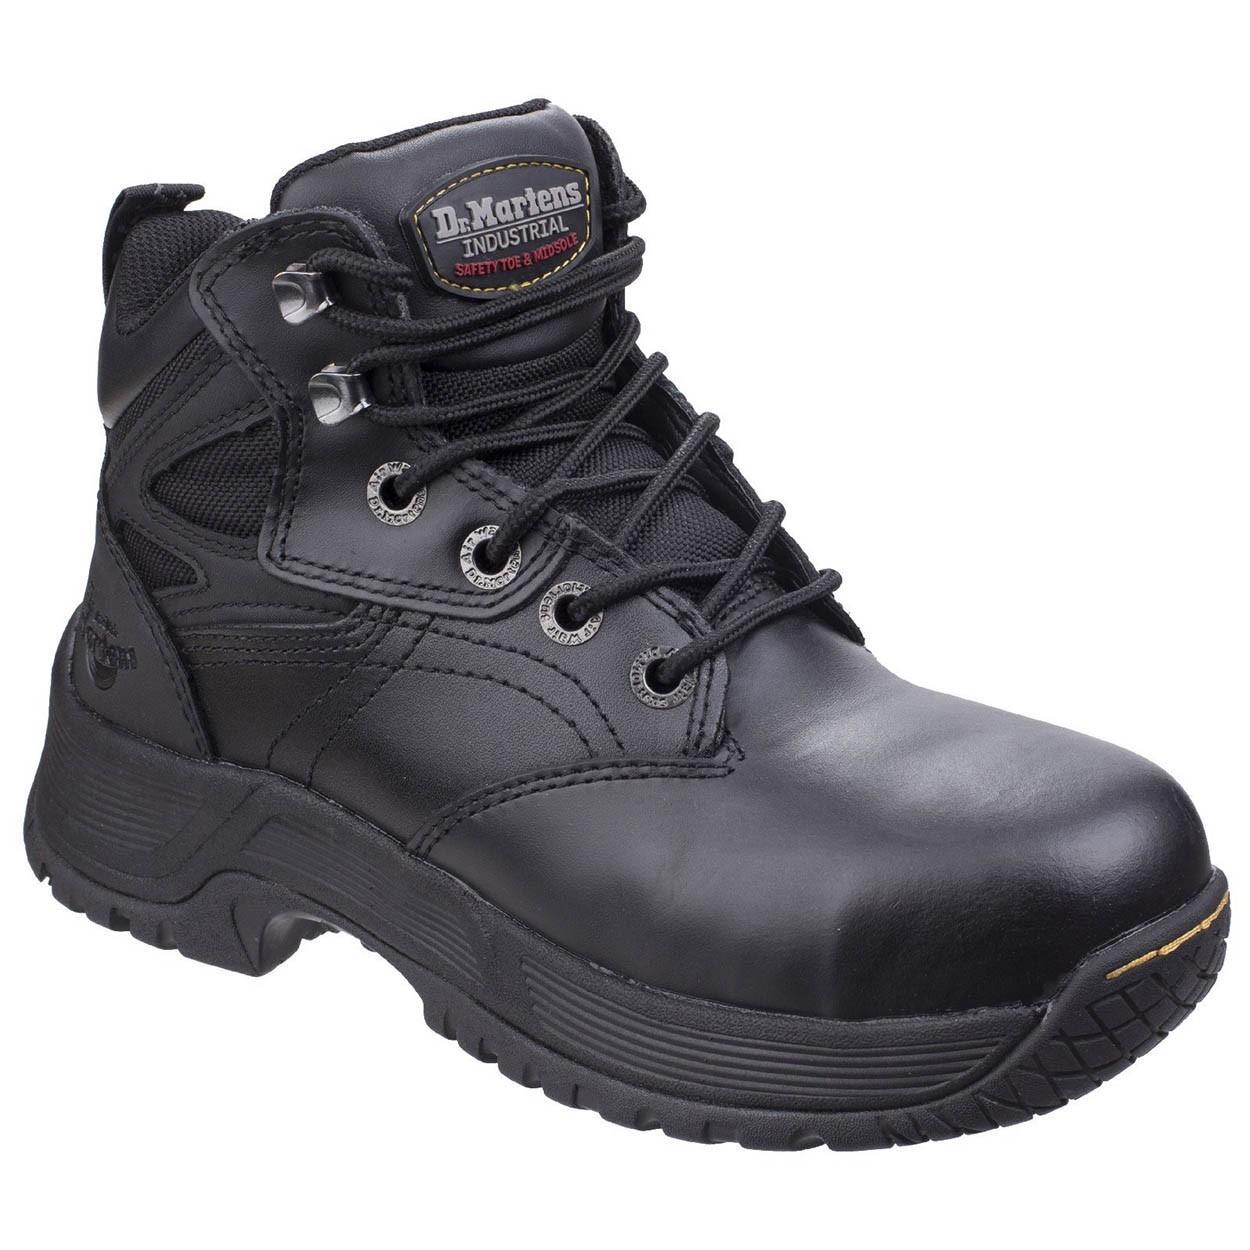 Dr Martens Torness S1P black leather steel toe/midsole work safety hiker boots